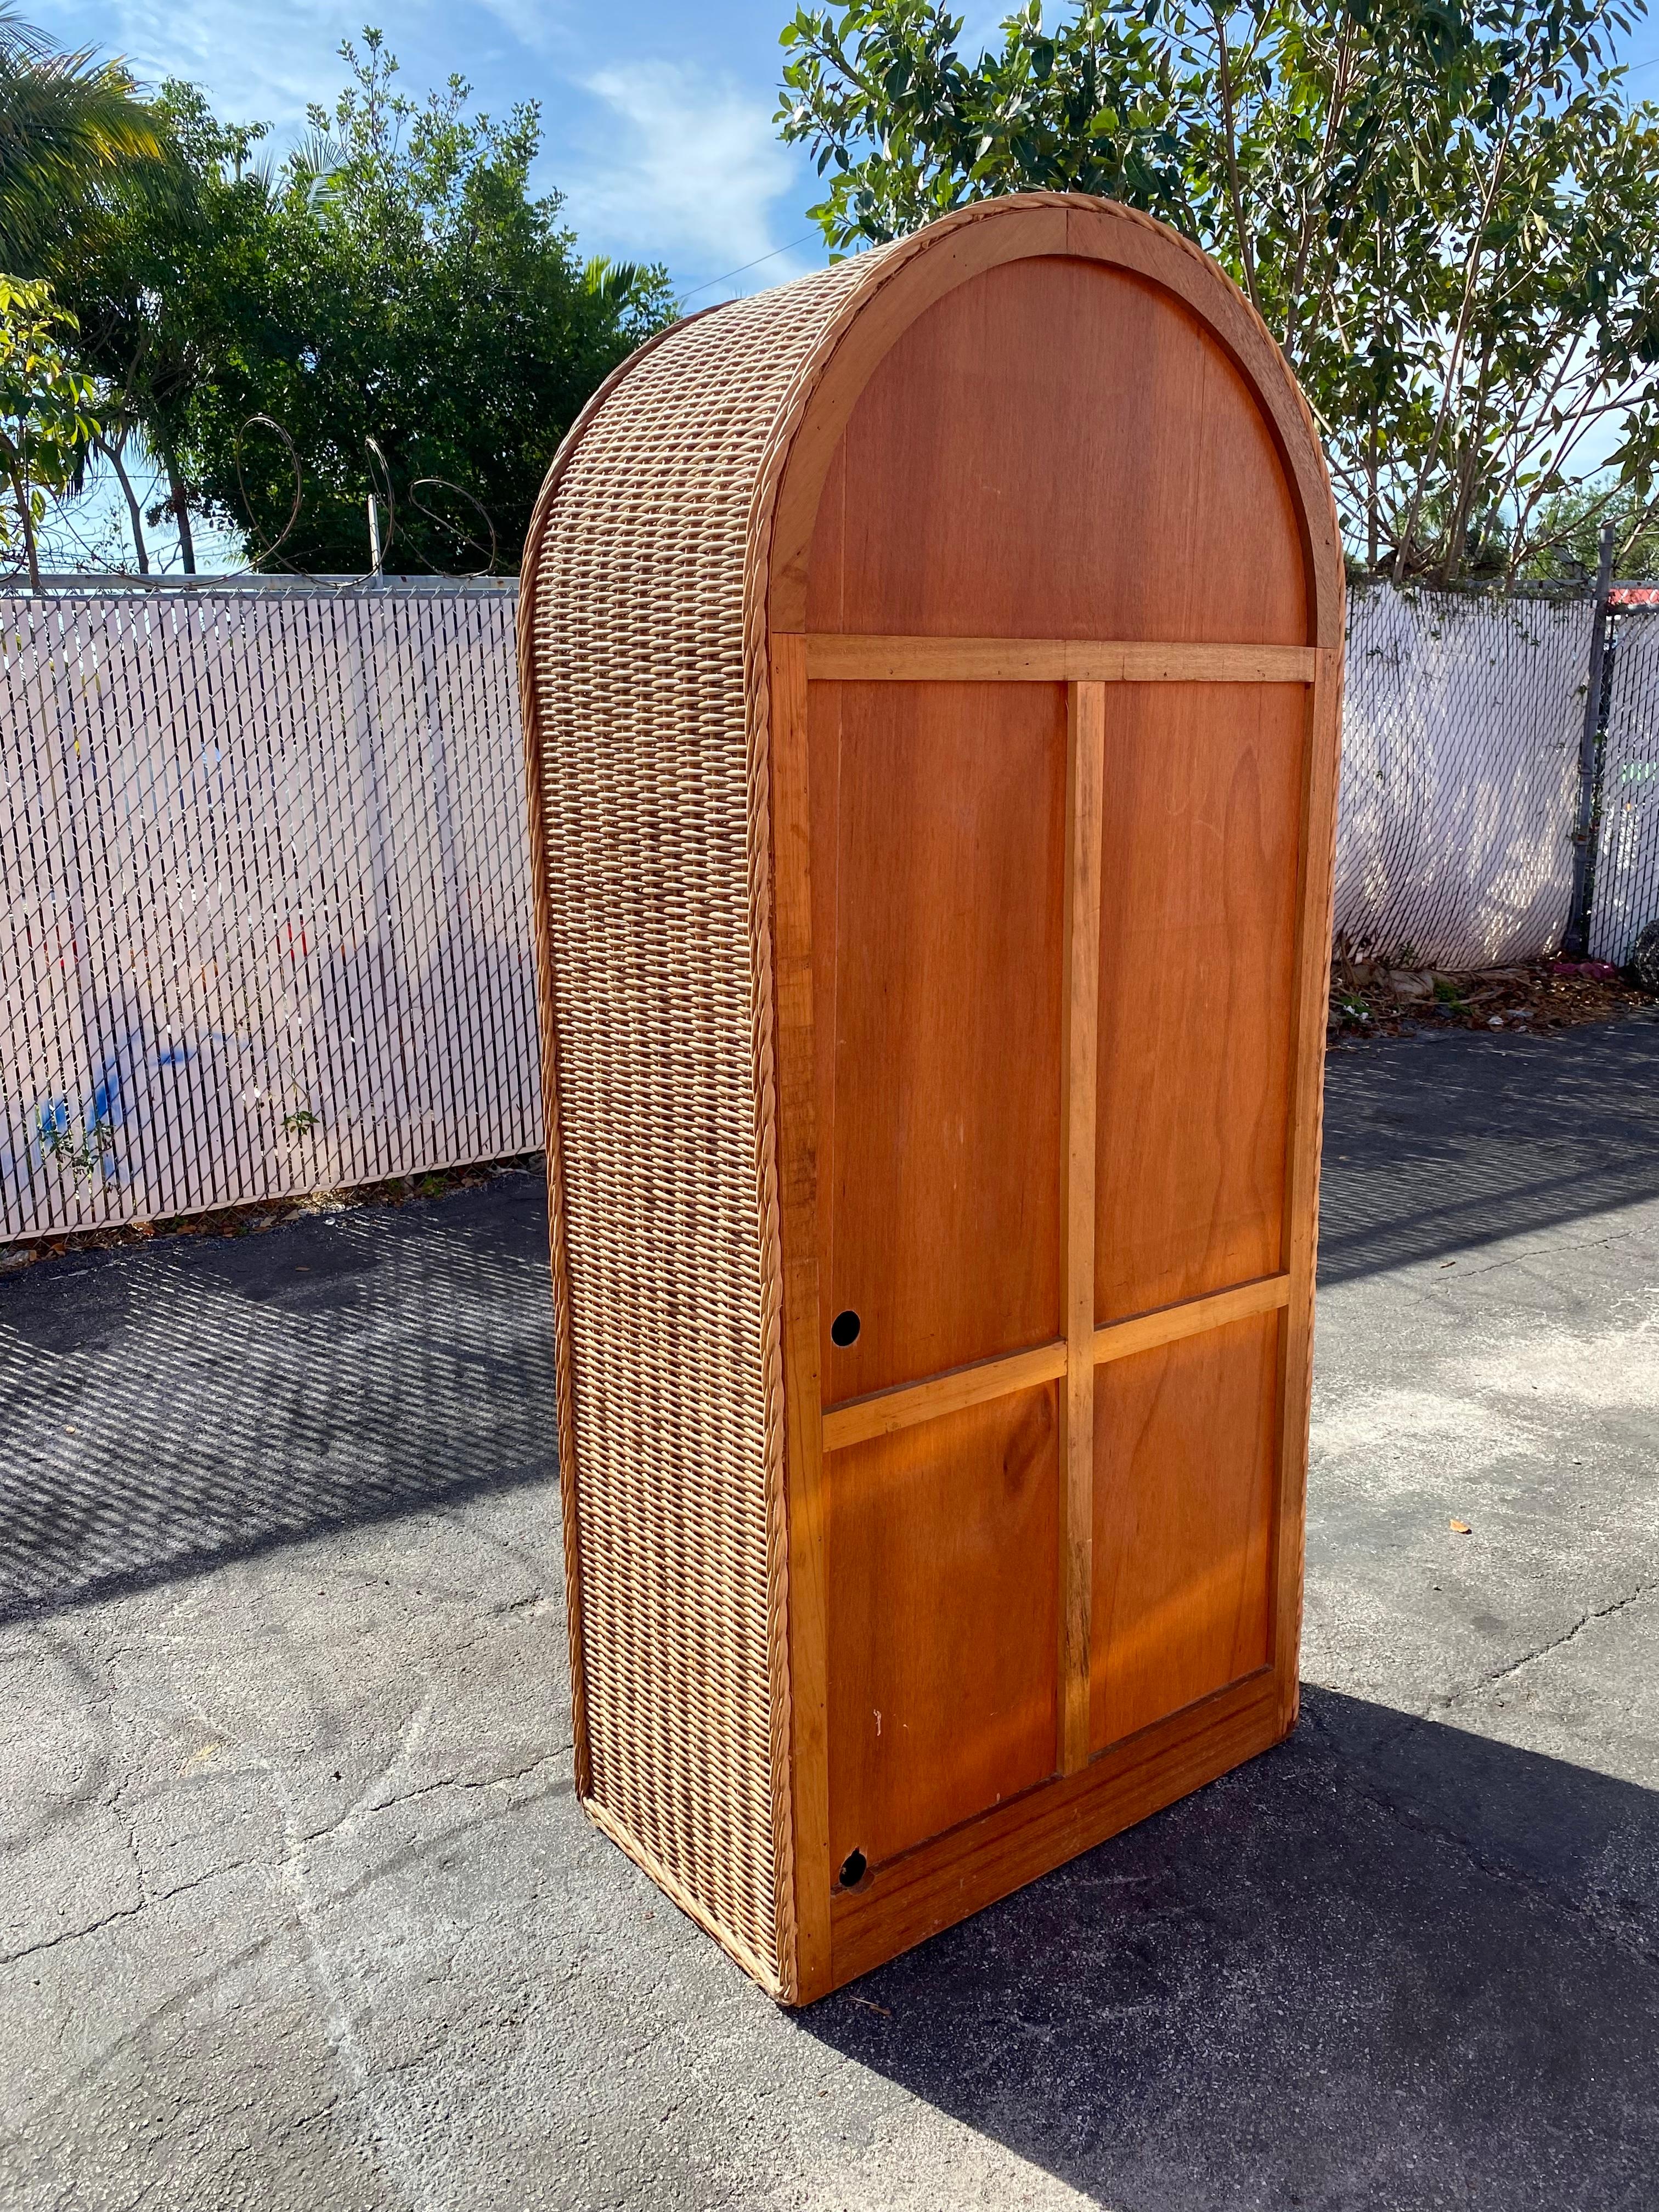 Philippine 1970s Rattan Curved Top Armoire Wardrobe Storage Cabinet For Sale